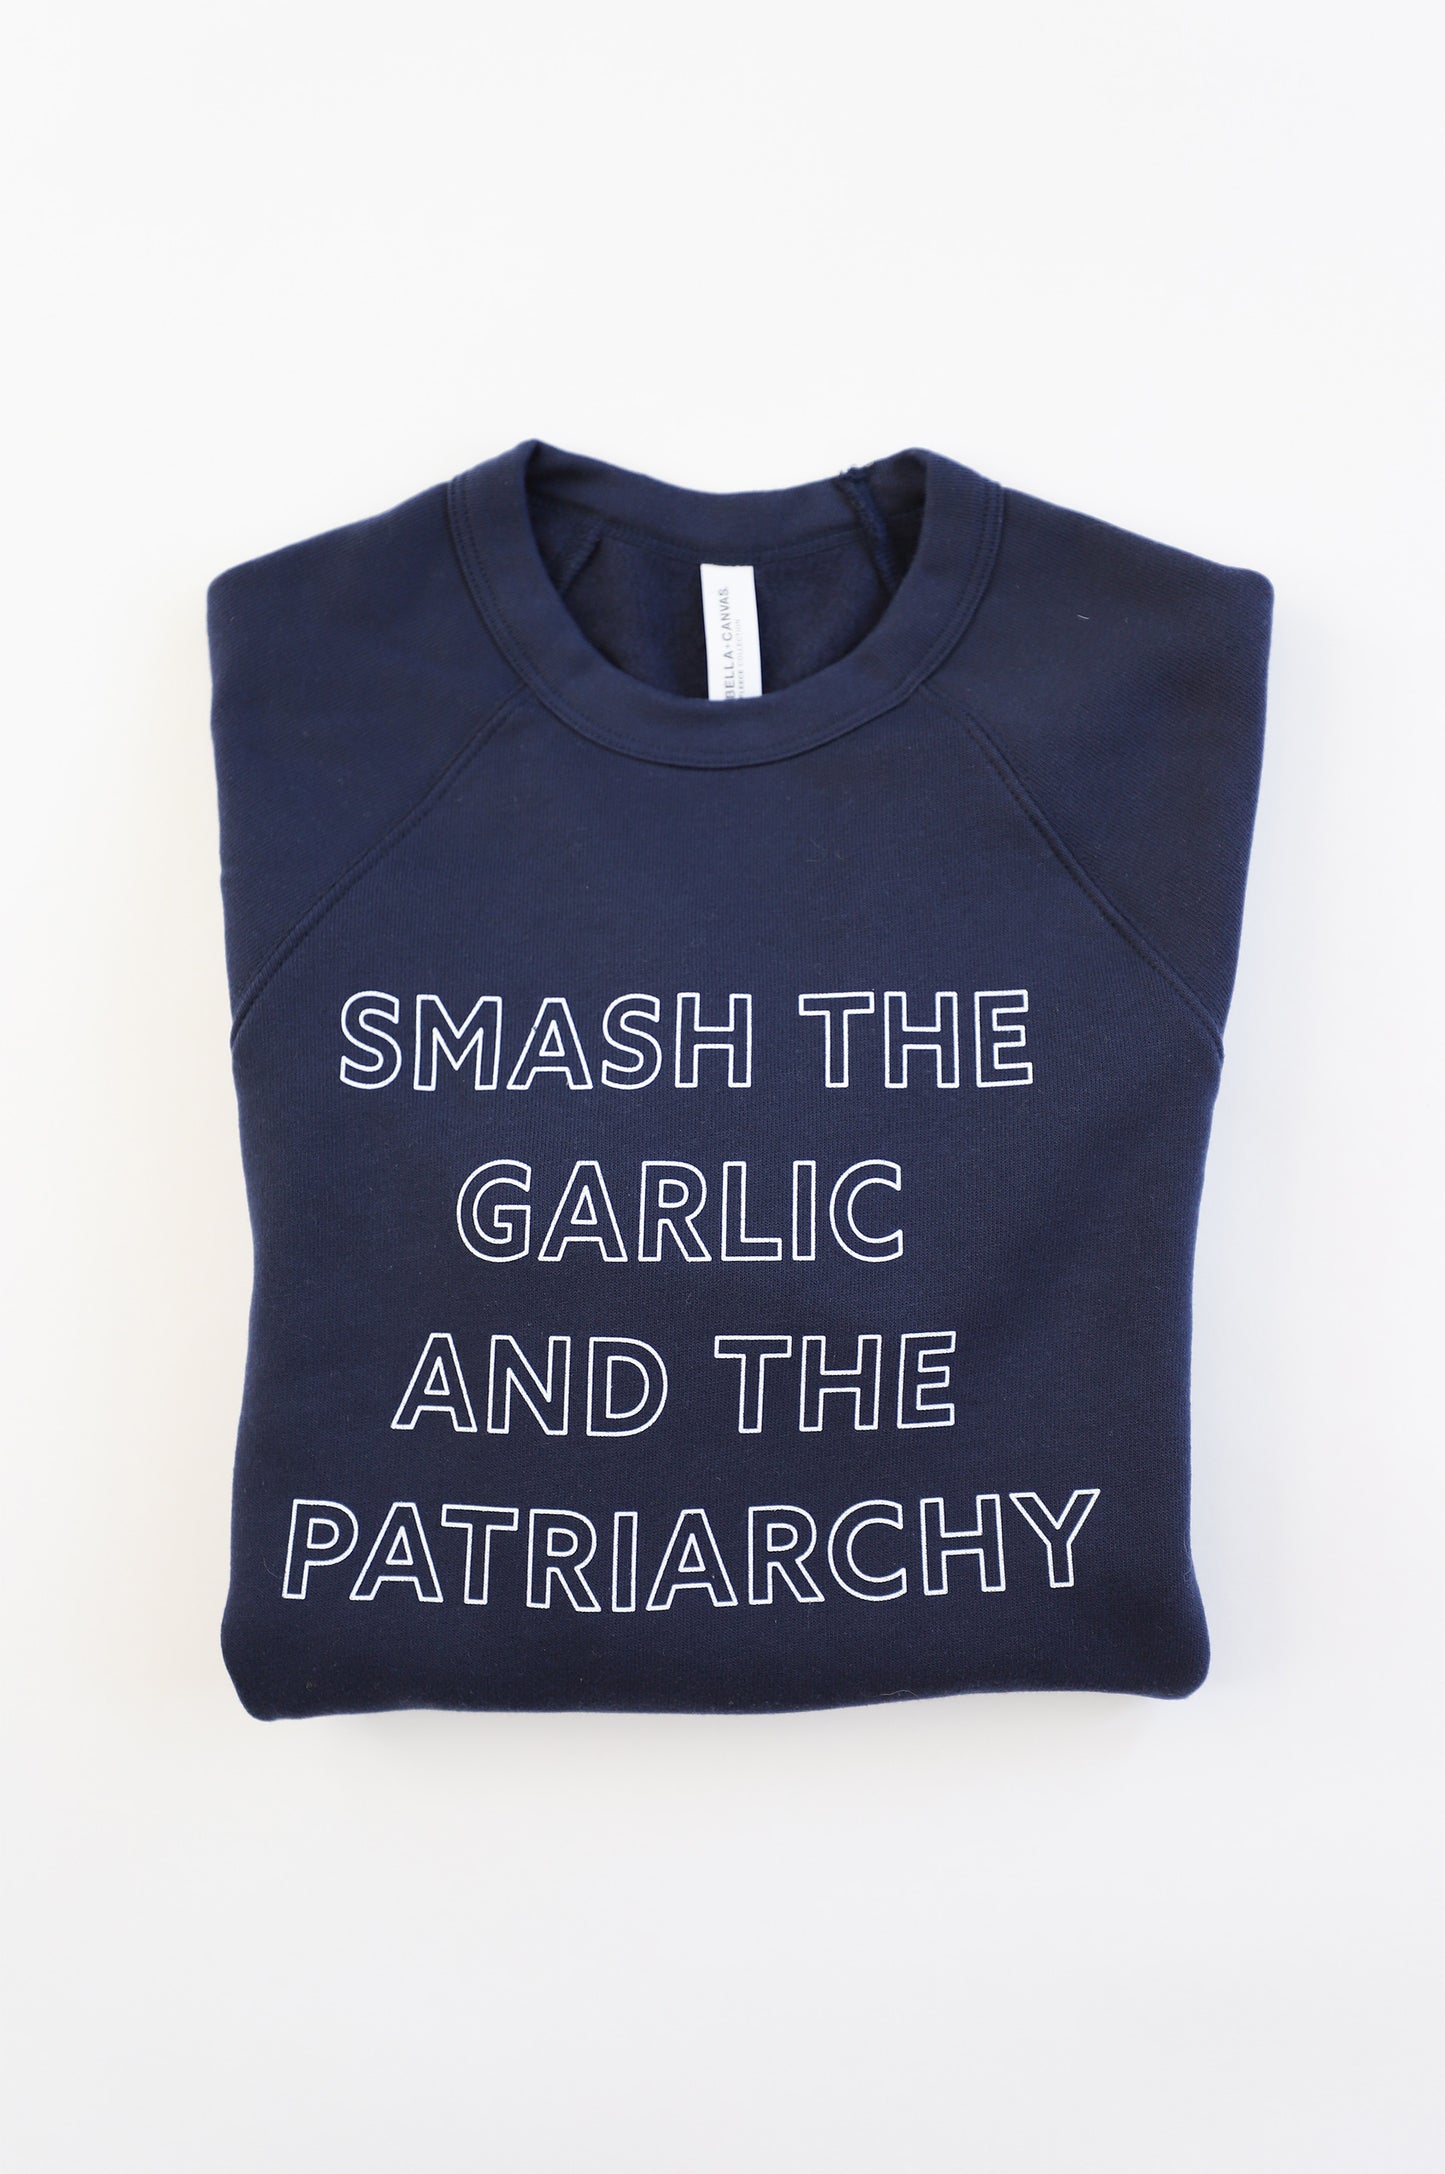 A folded navy blue crewneck reads "Smash the Garlic and the Patriarchy" in white block letters